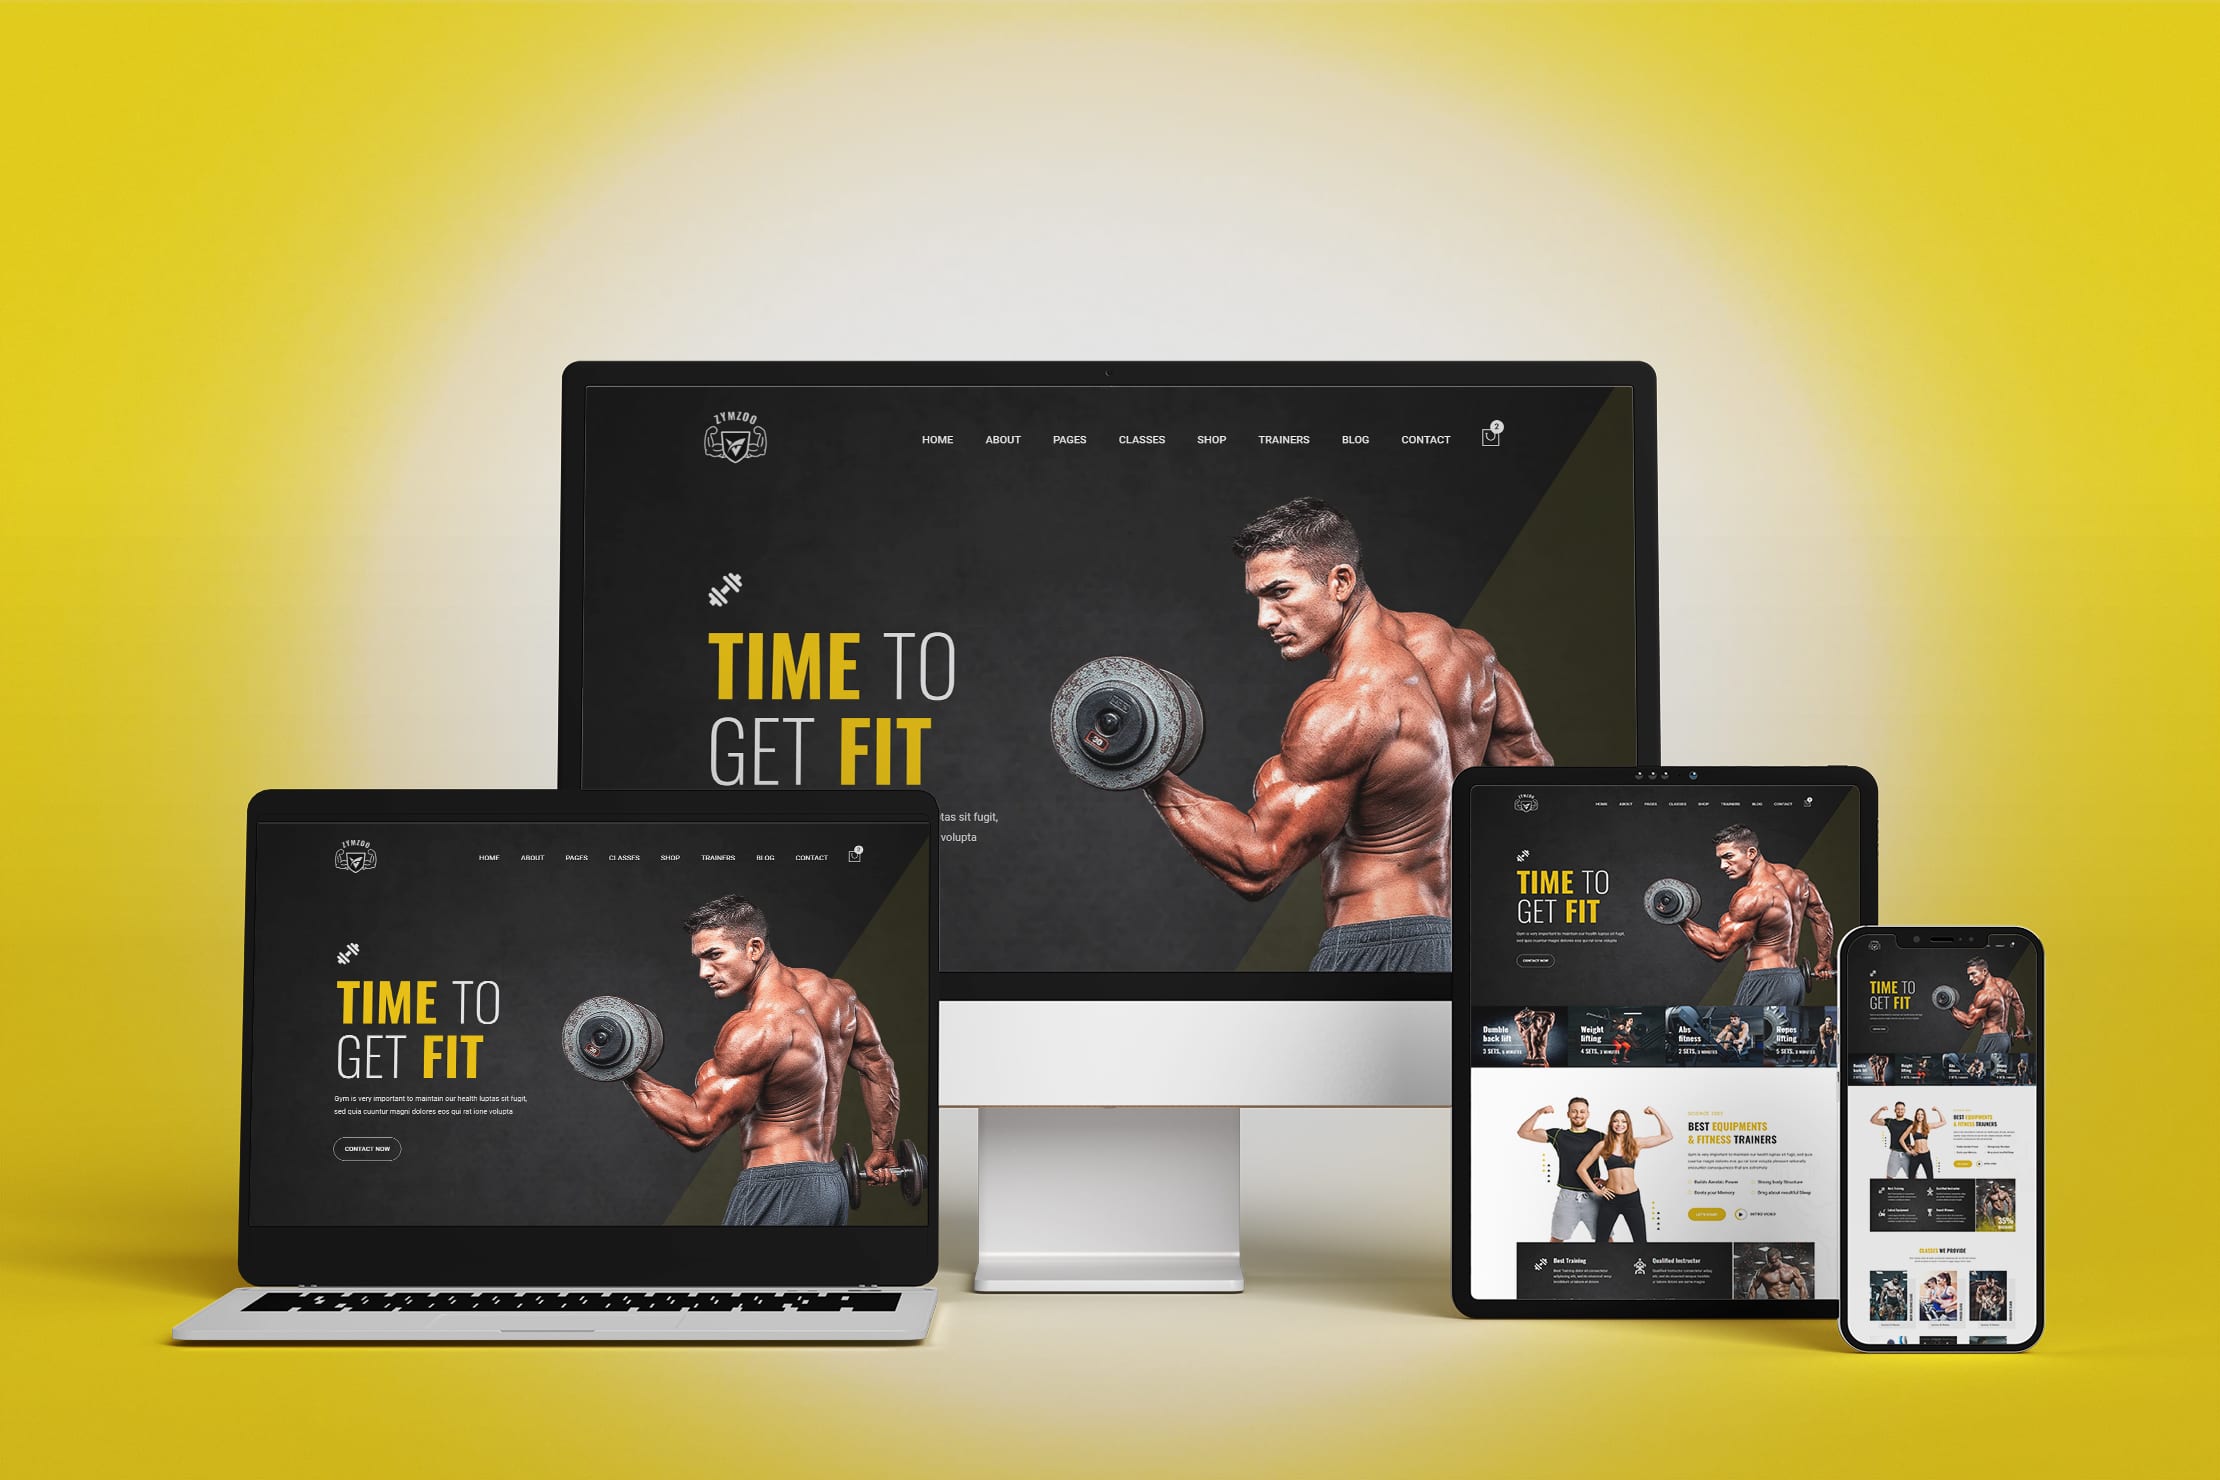 Design or redesign wix website for gym fitness health workout yoga sports  coach by Bestwix